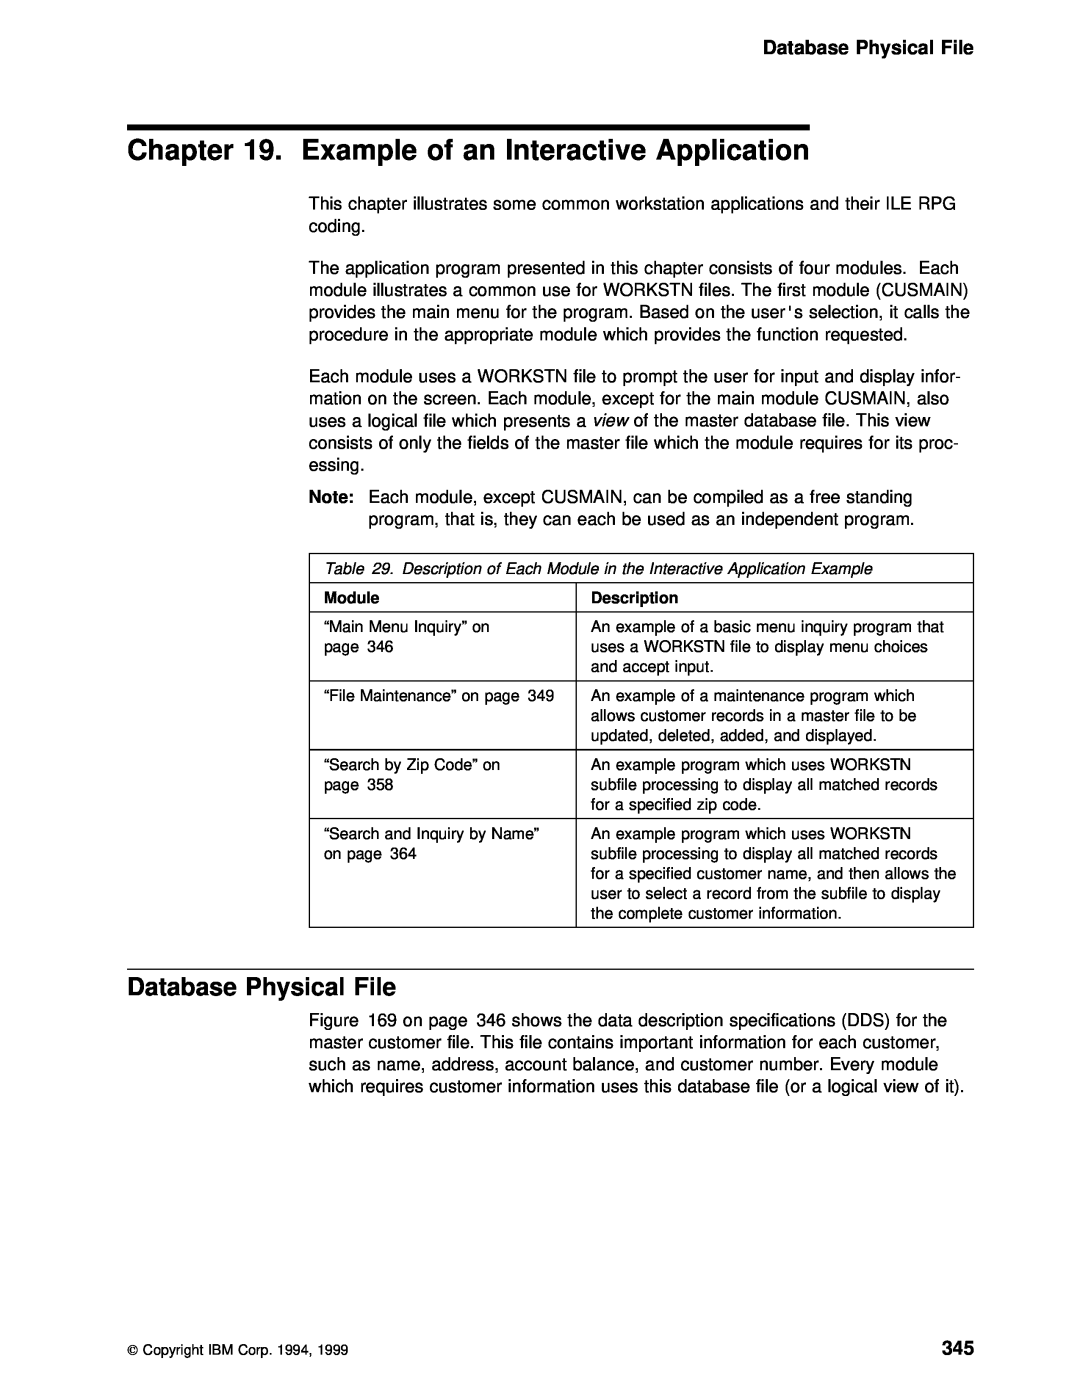 IBM AS/400 manual Example of an Interactive Application, Database Physical File 